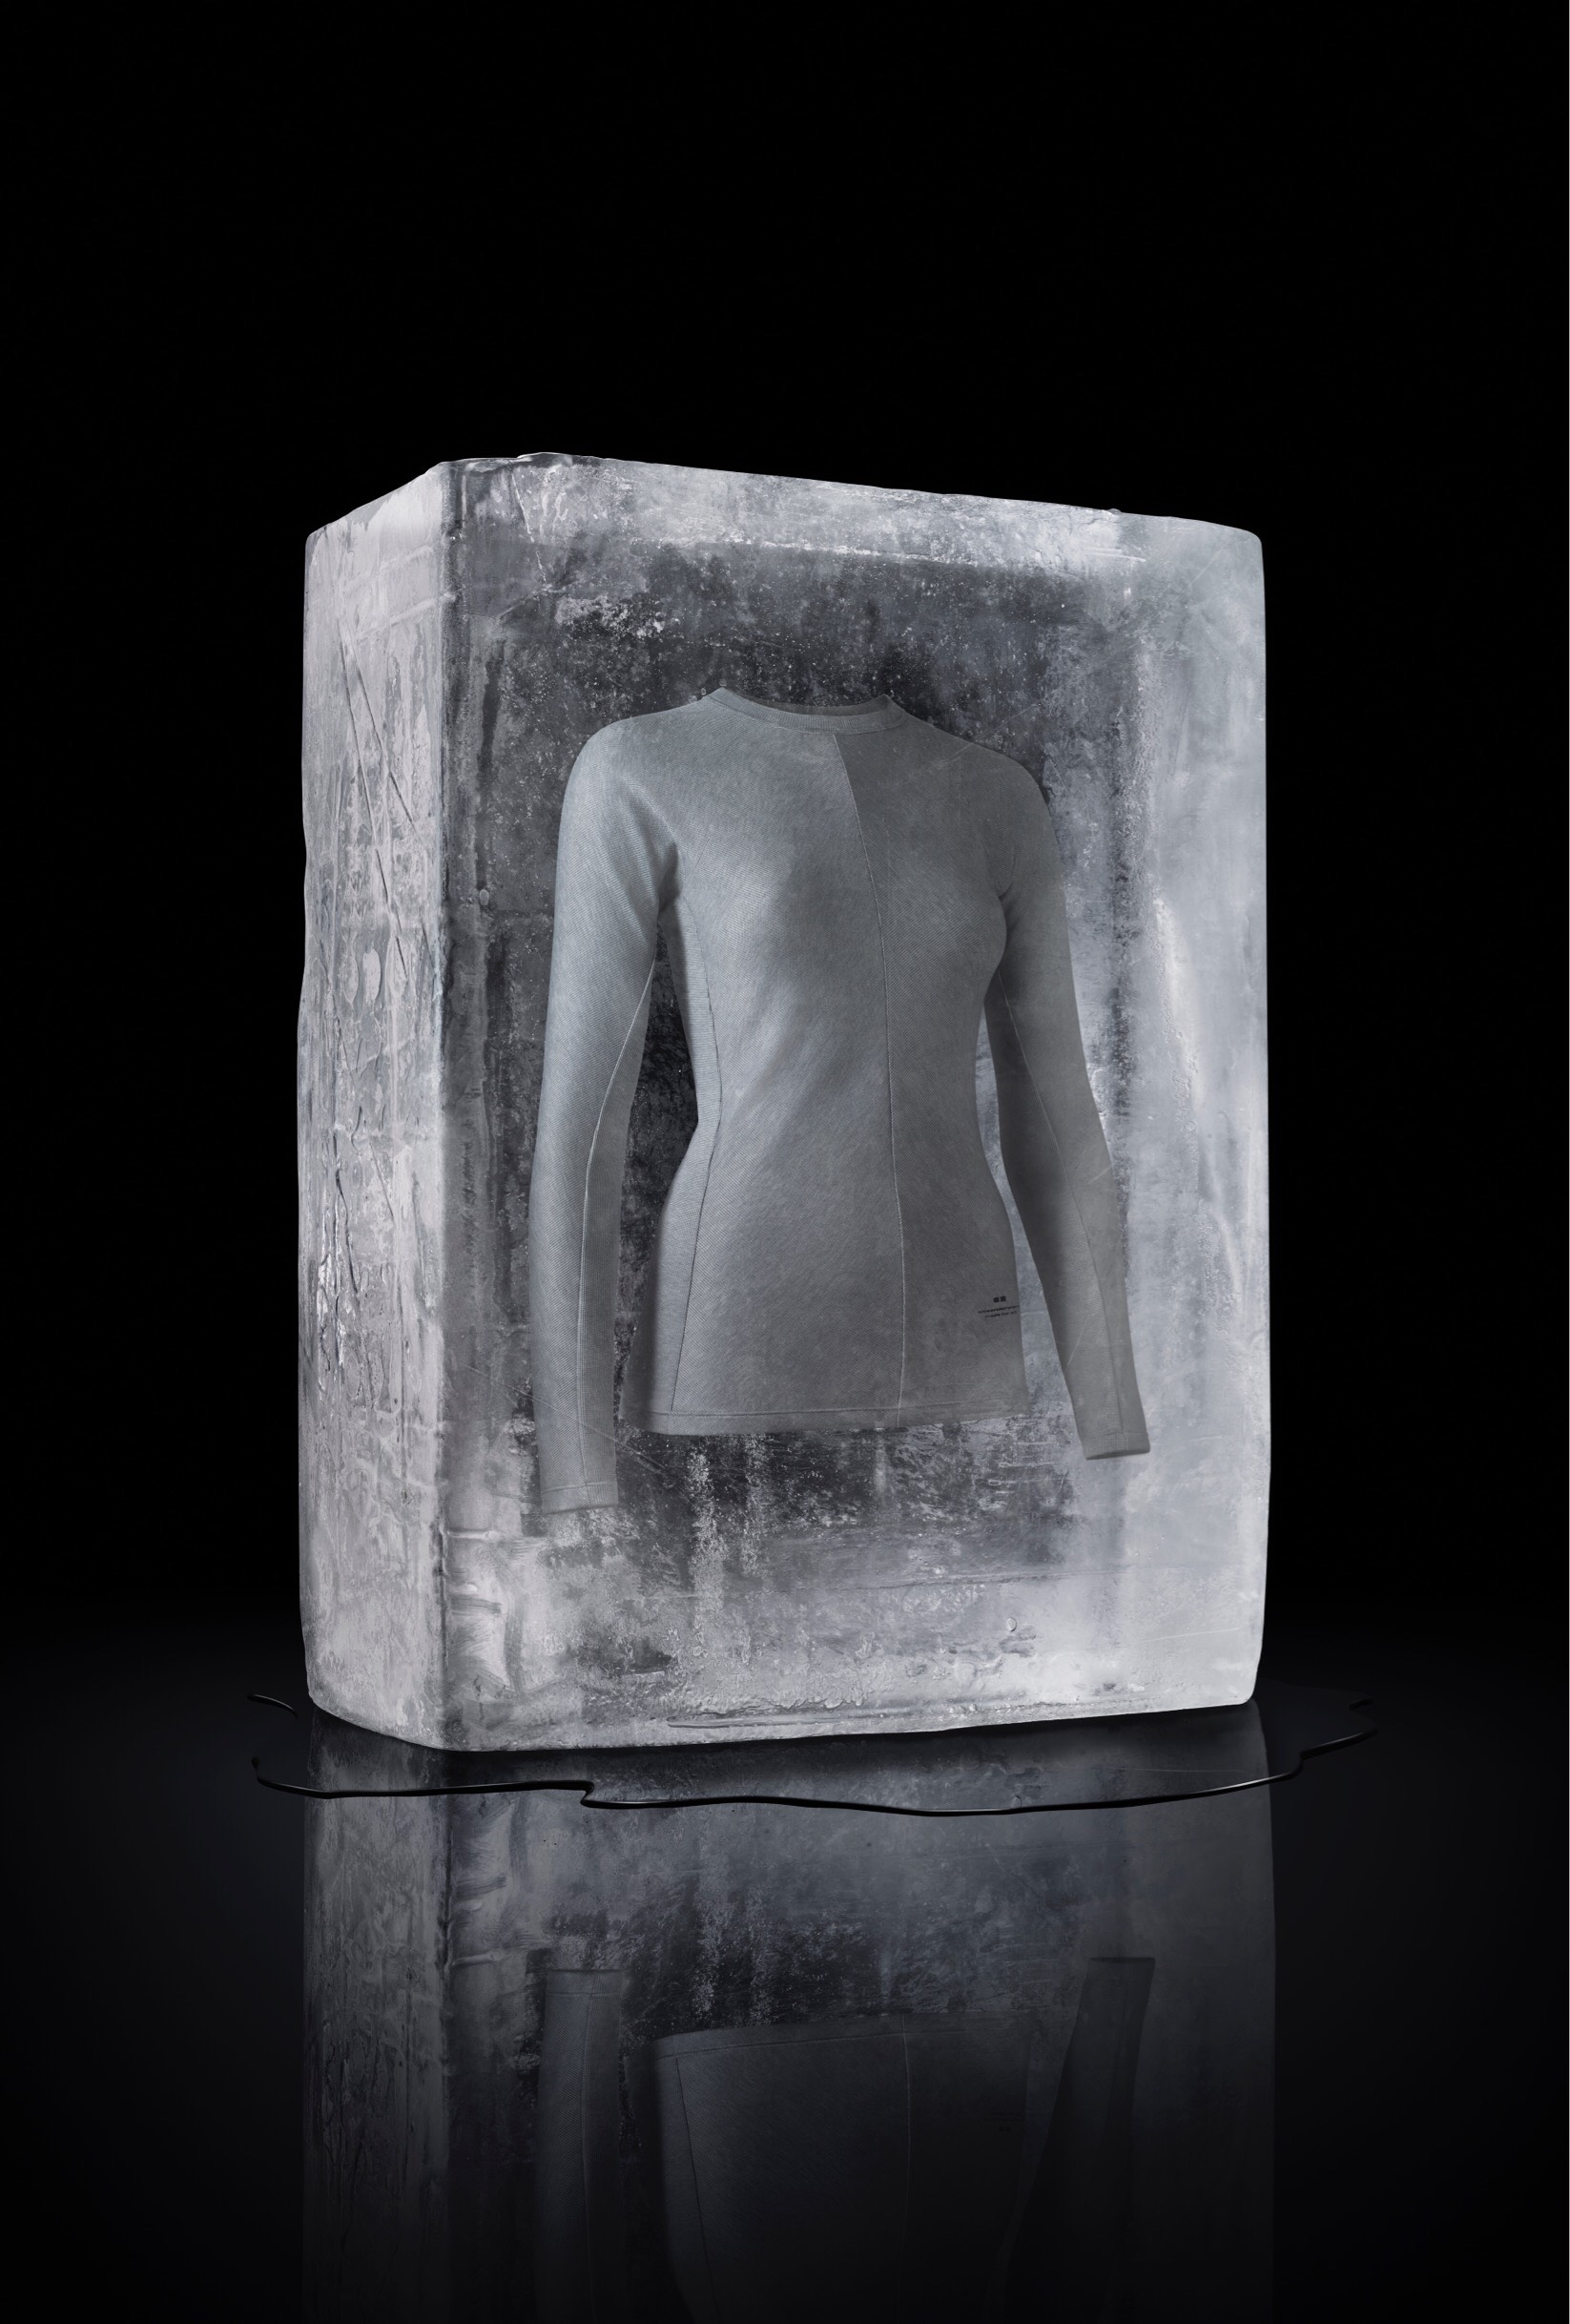 ‘WARMTH REIMAGINED.’ Promotional photo shows the collection’s pieces inside an ice block, and according to the press release, ‘express[es] the thought that Heattech transcends fhe cold and is warm enough to melt away the ice it is encased in.’ Photo courtesy of Uniqlo 